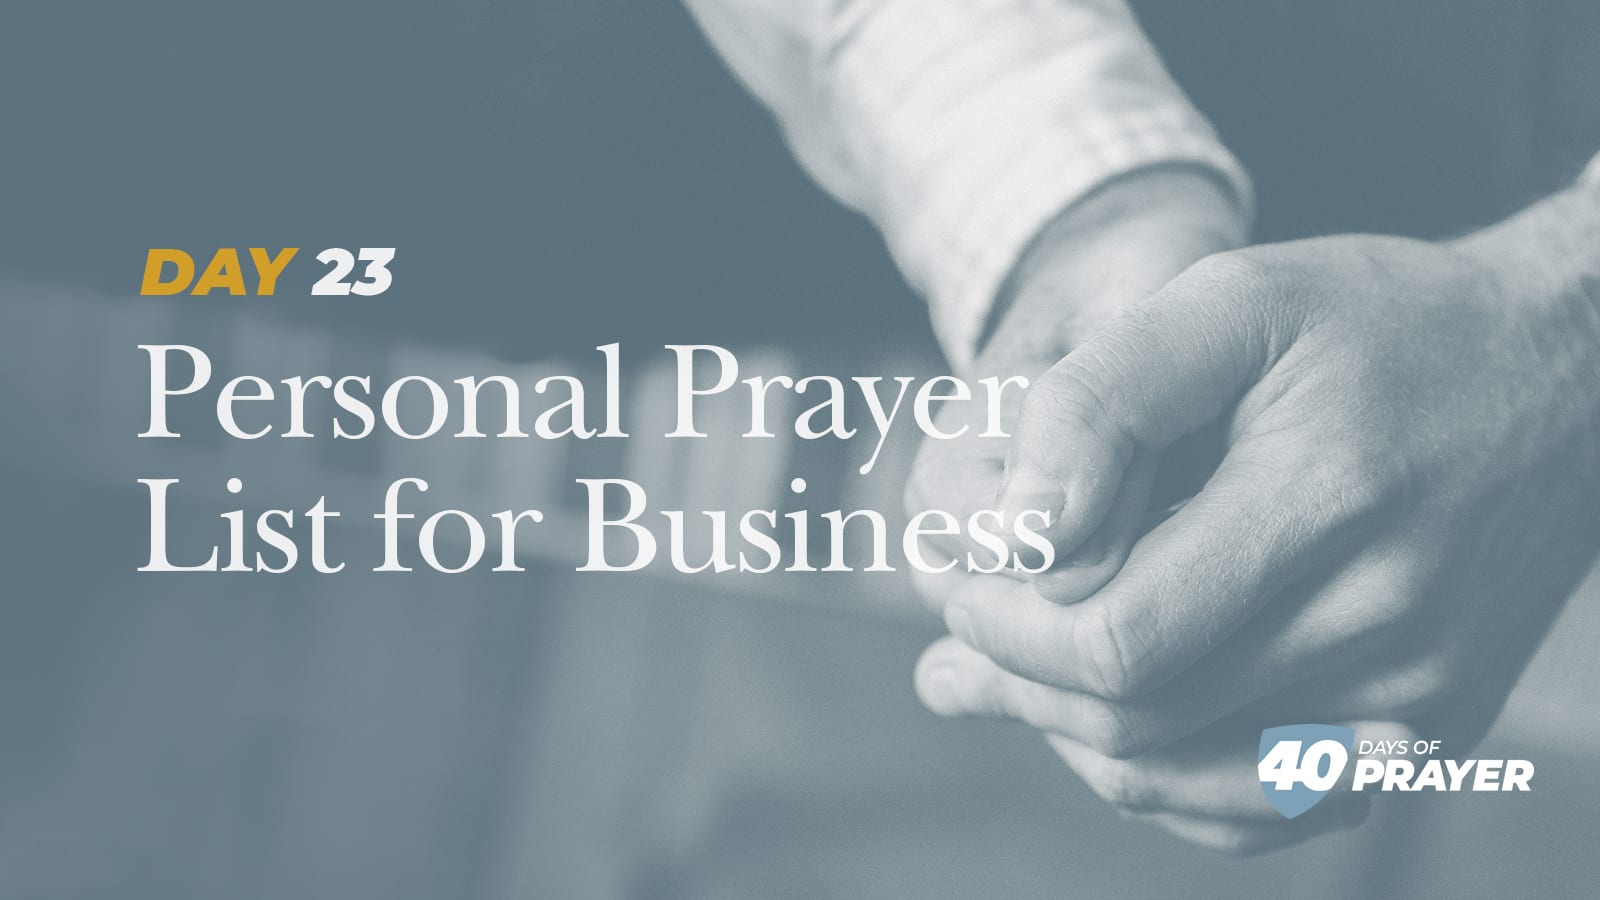 40 days of Prayer Day 23: Personal prayer for Business